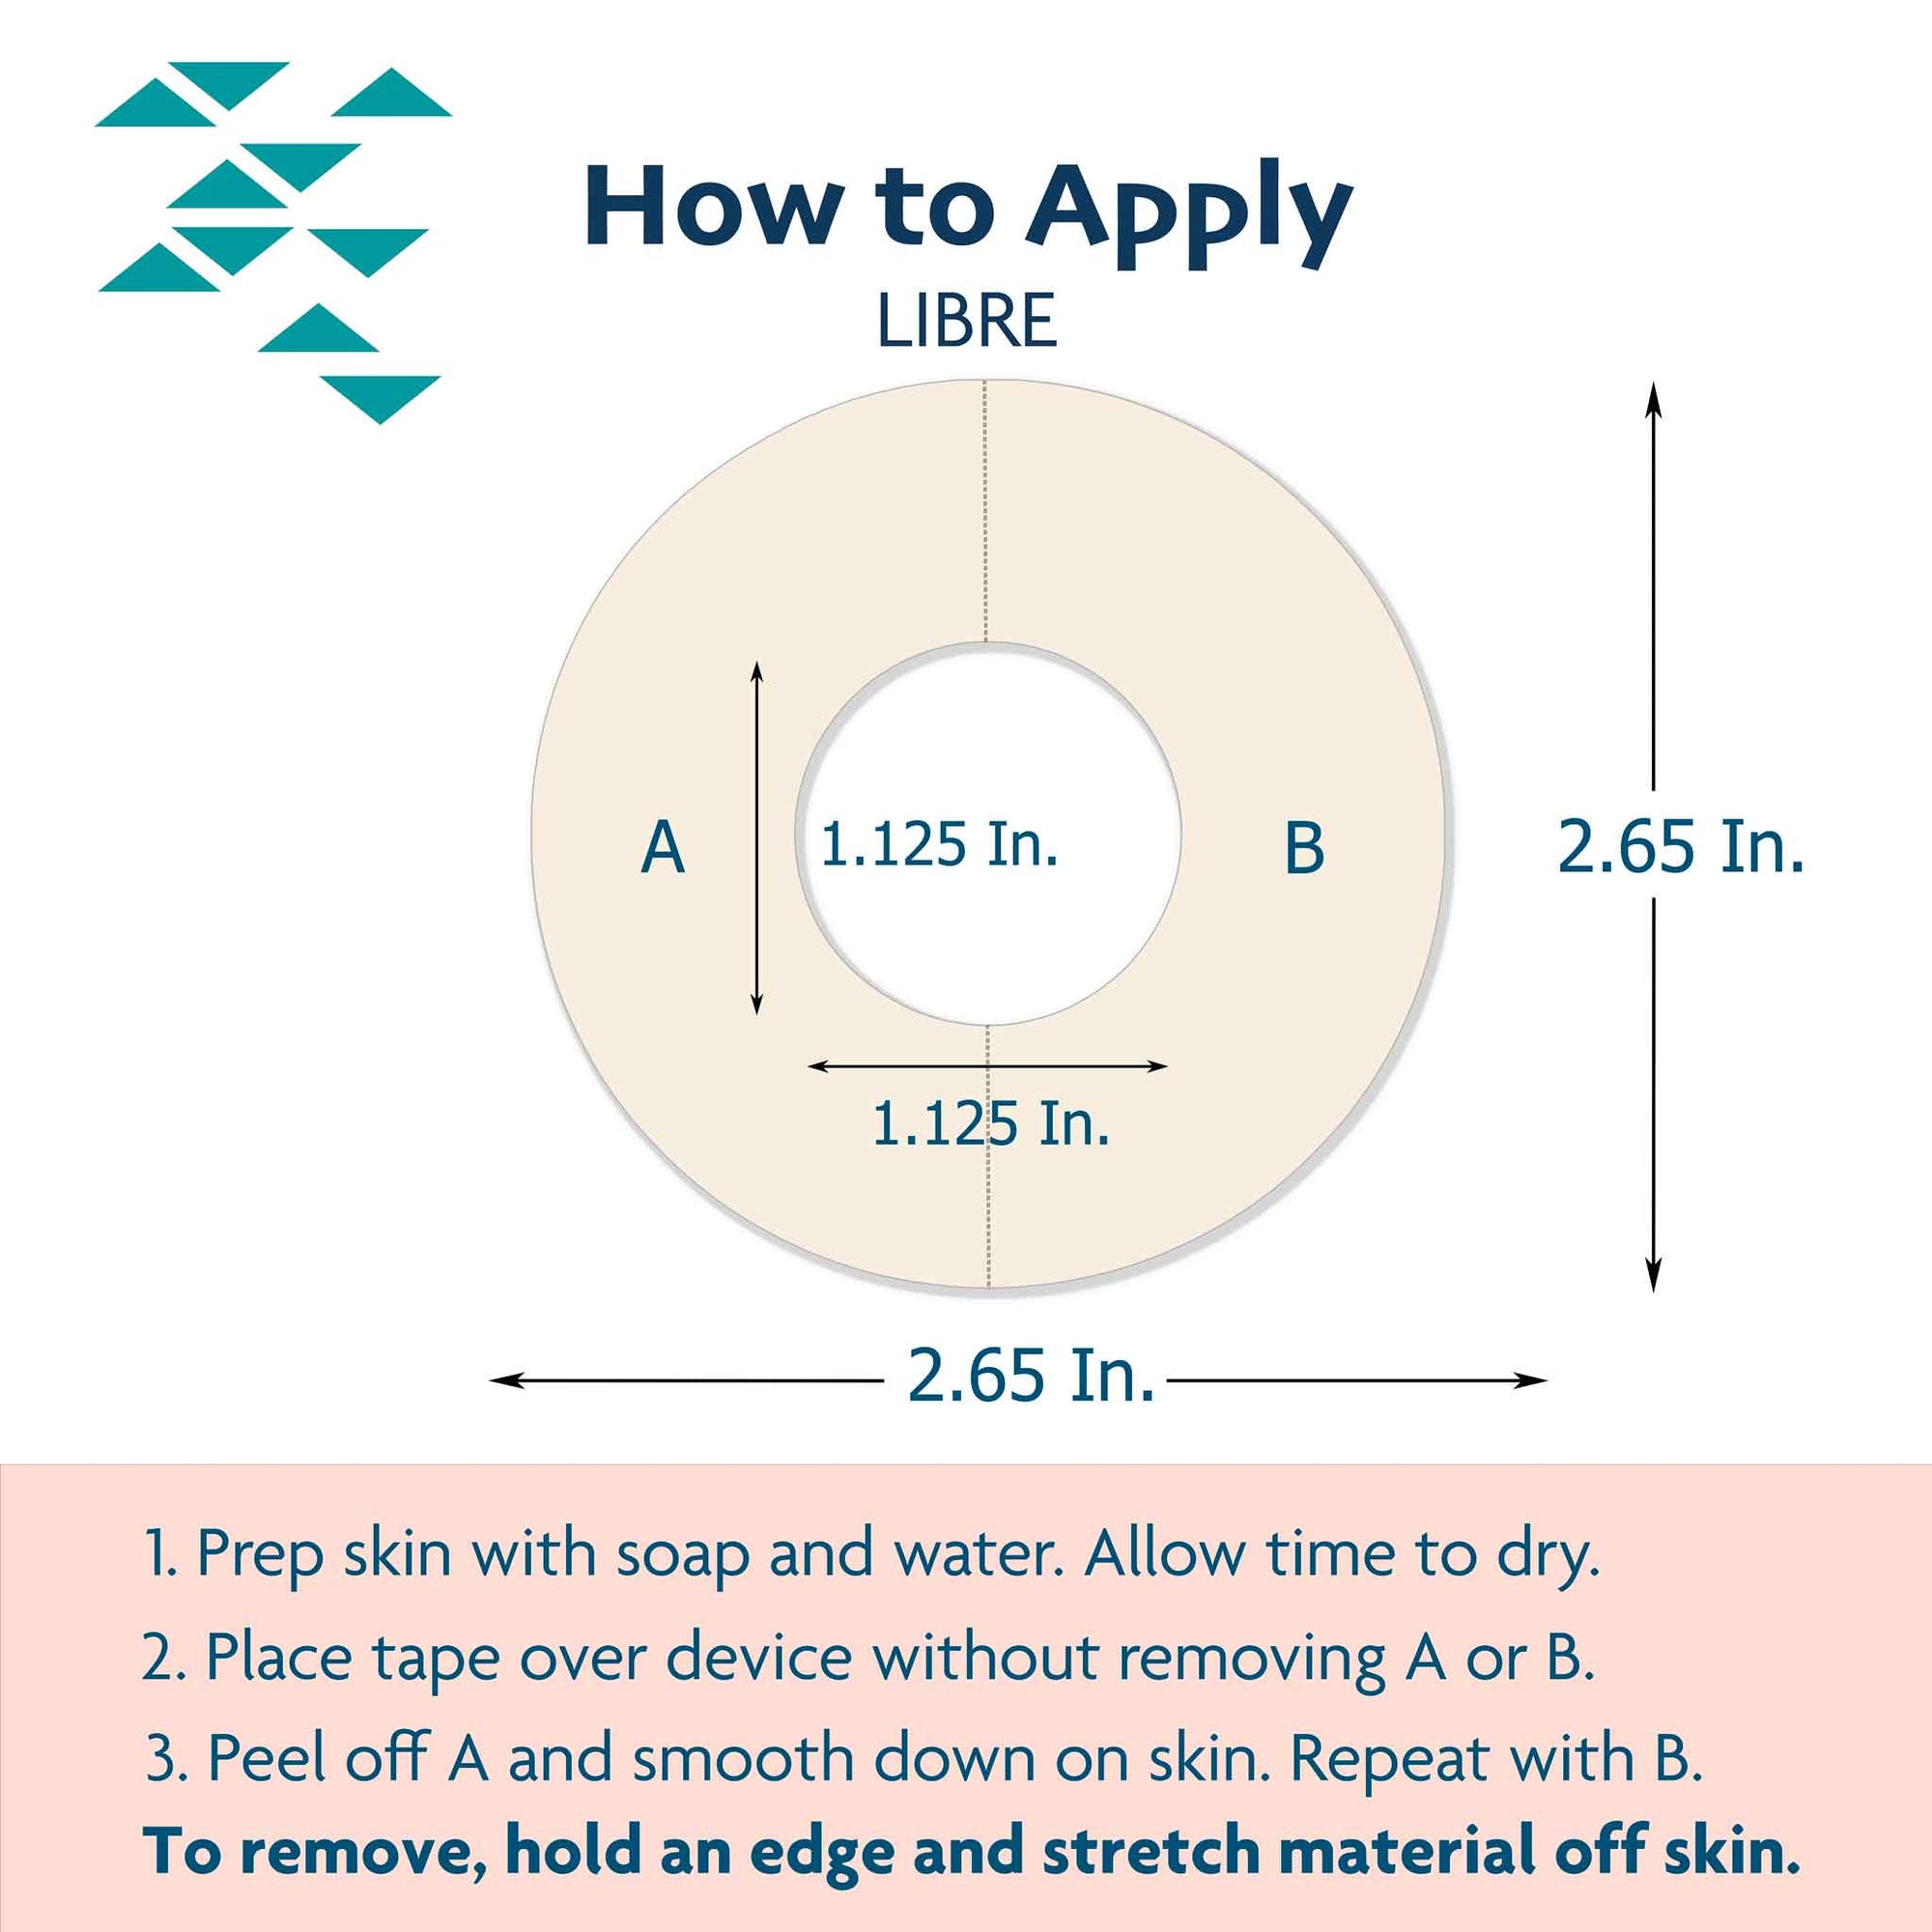 ExpressionMed Applying libre adhesive to freestyle site